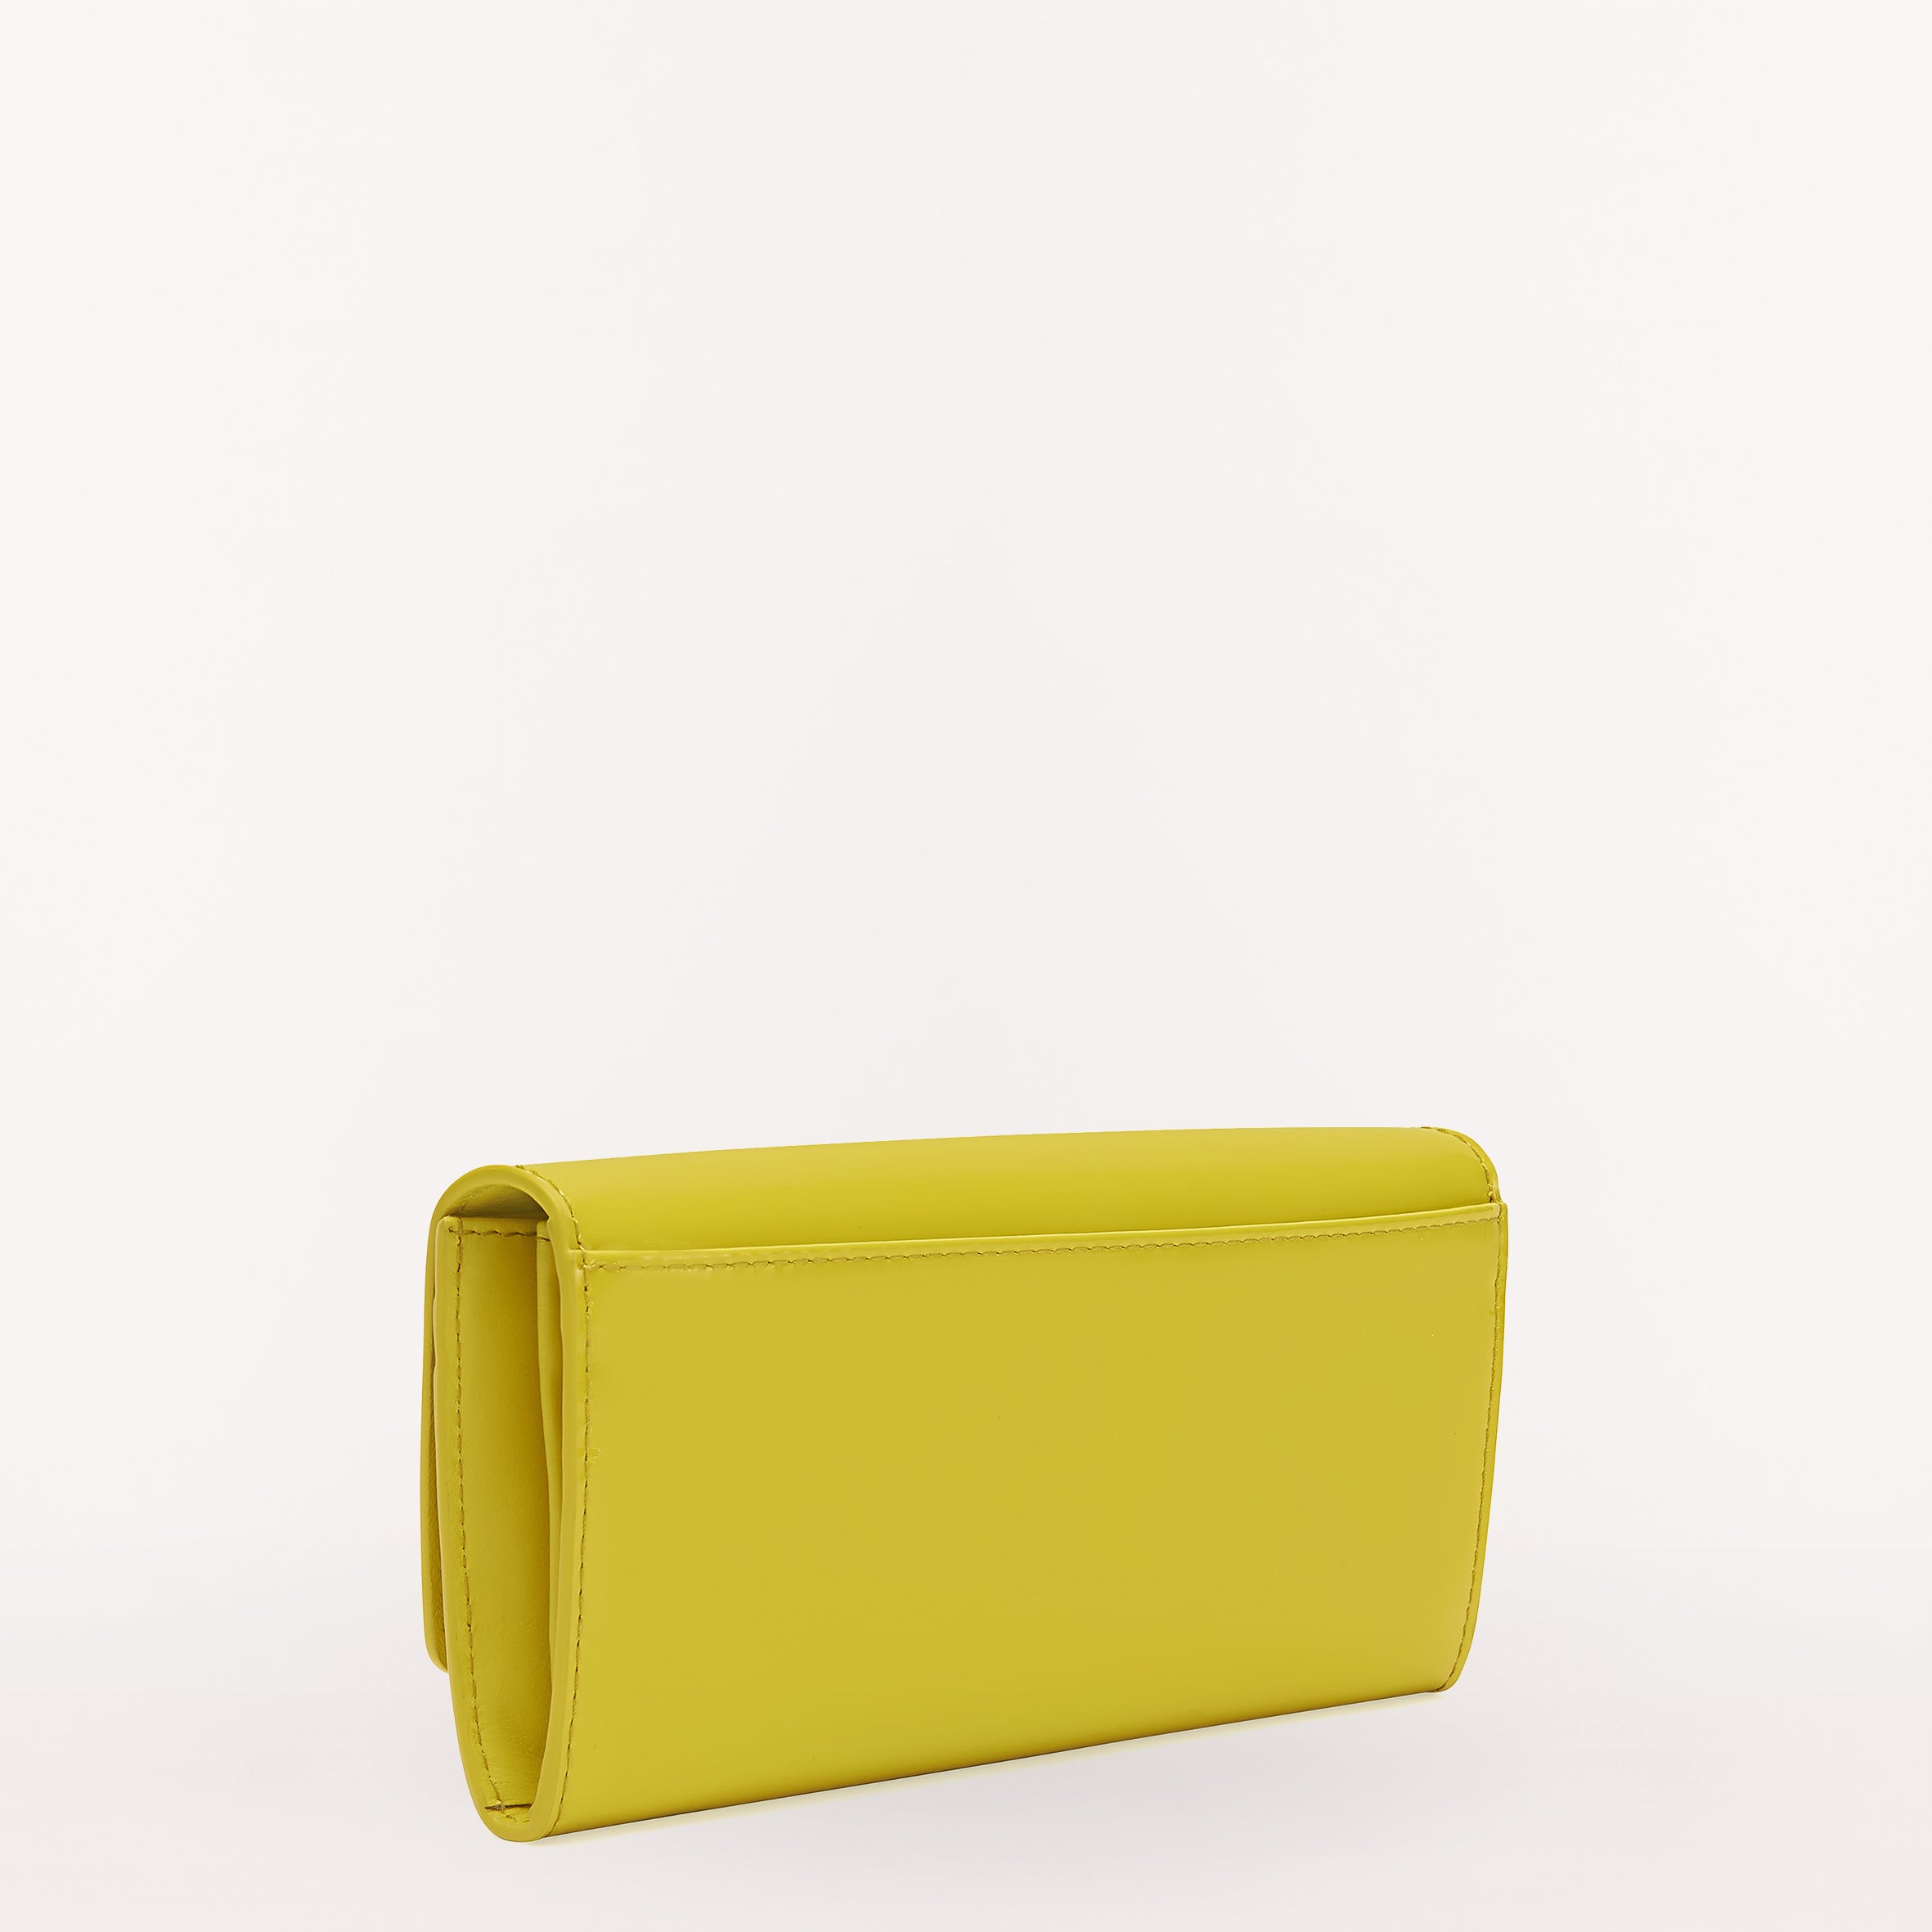 Furla 1927 Continental Wallet Canary One Size PCV0ACO PCV0ACOX700001999S1007